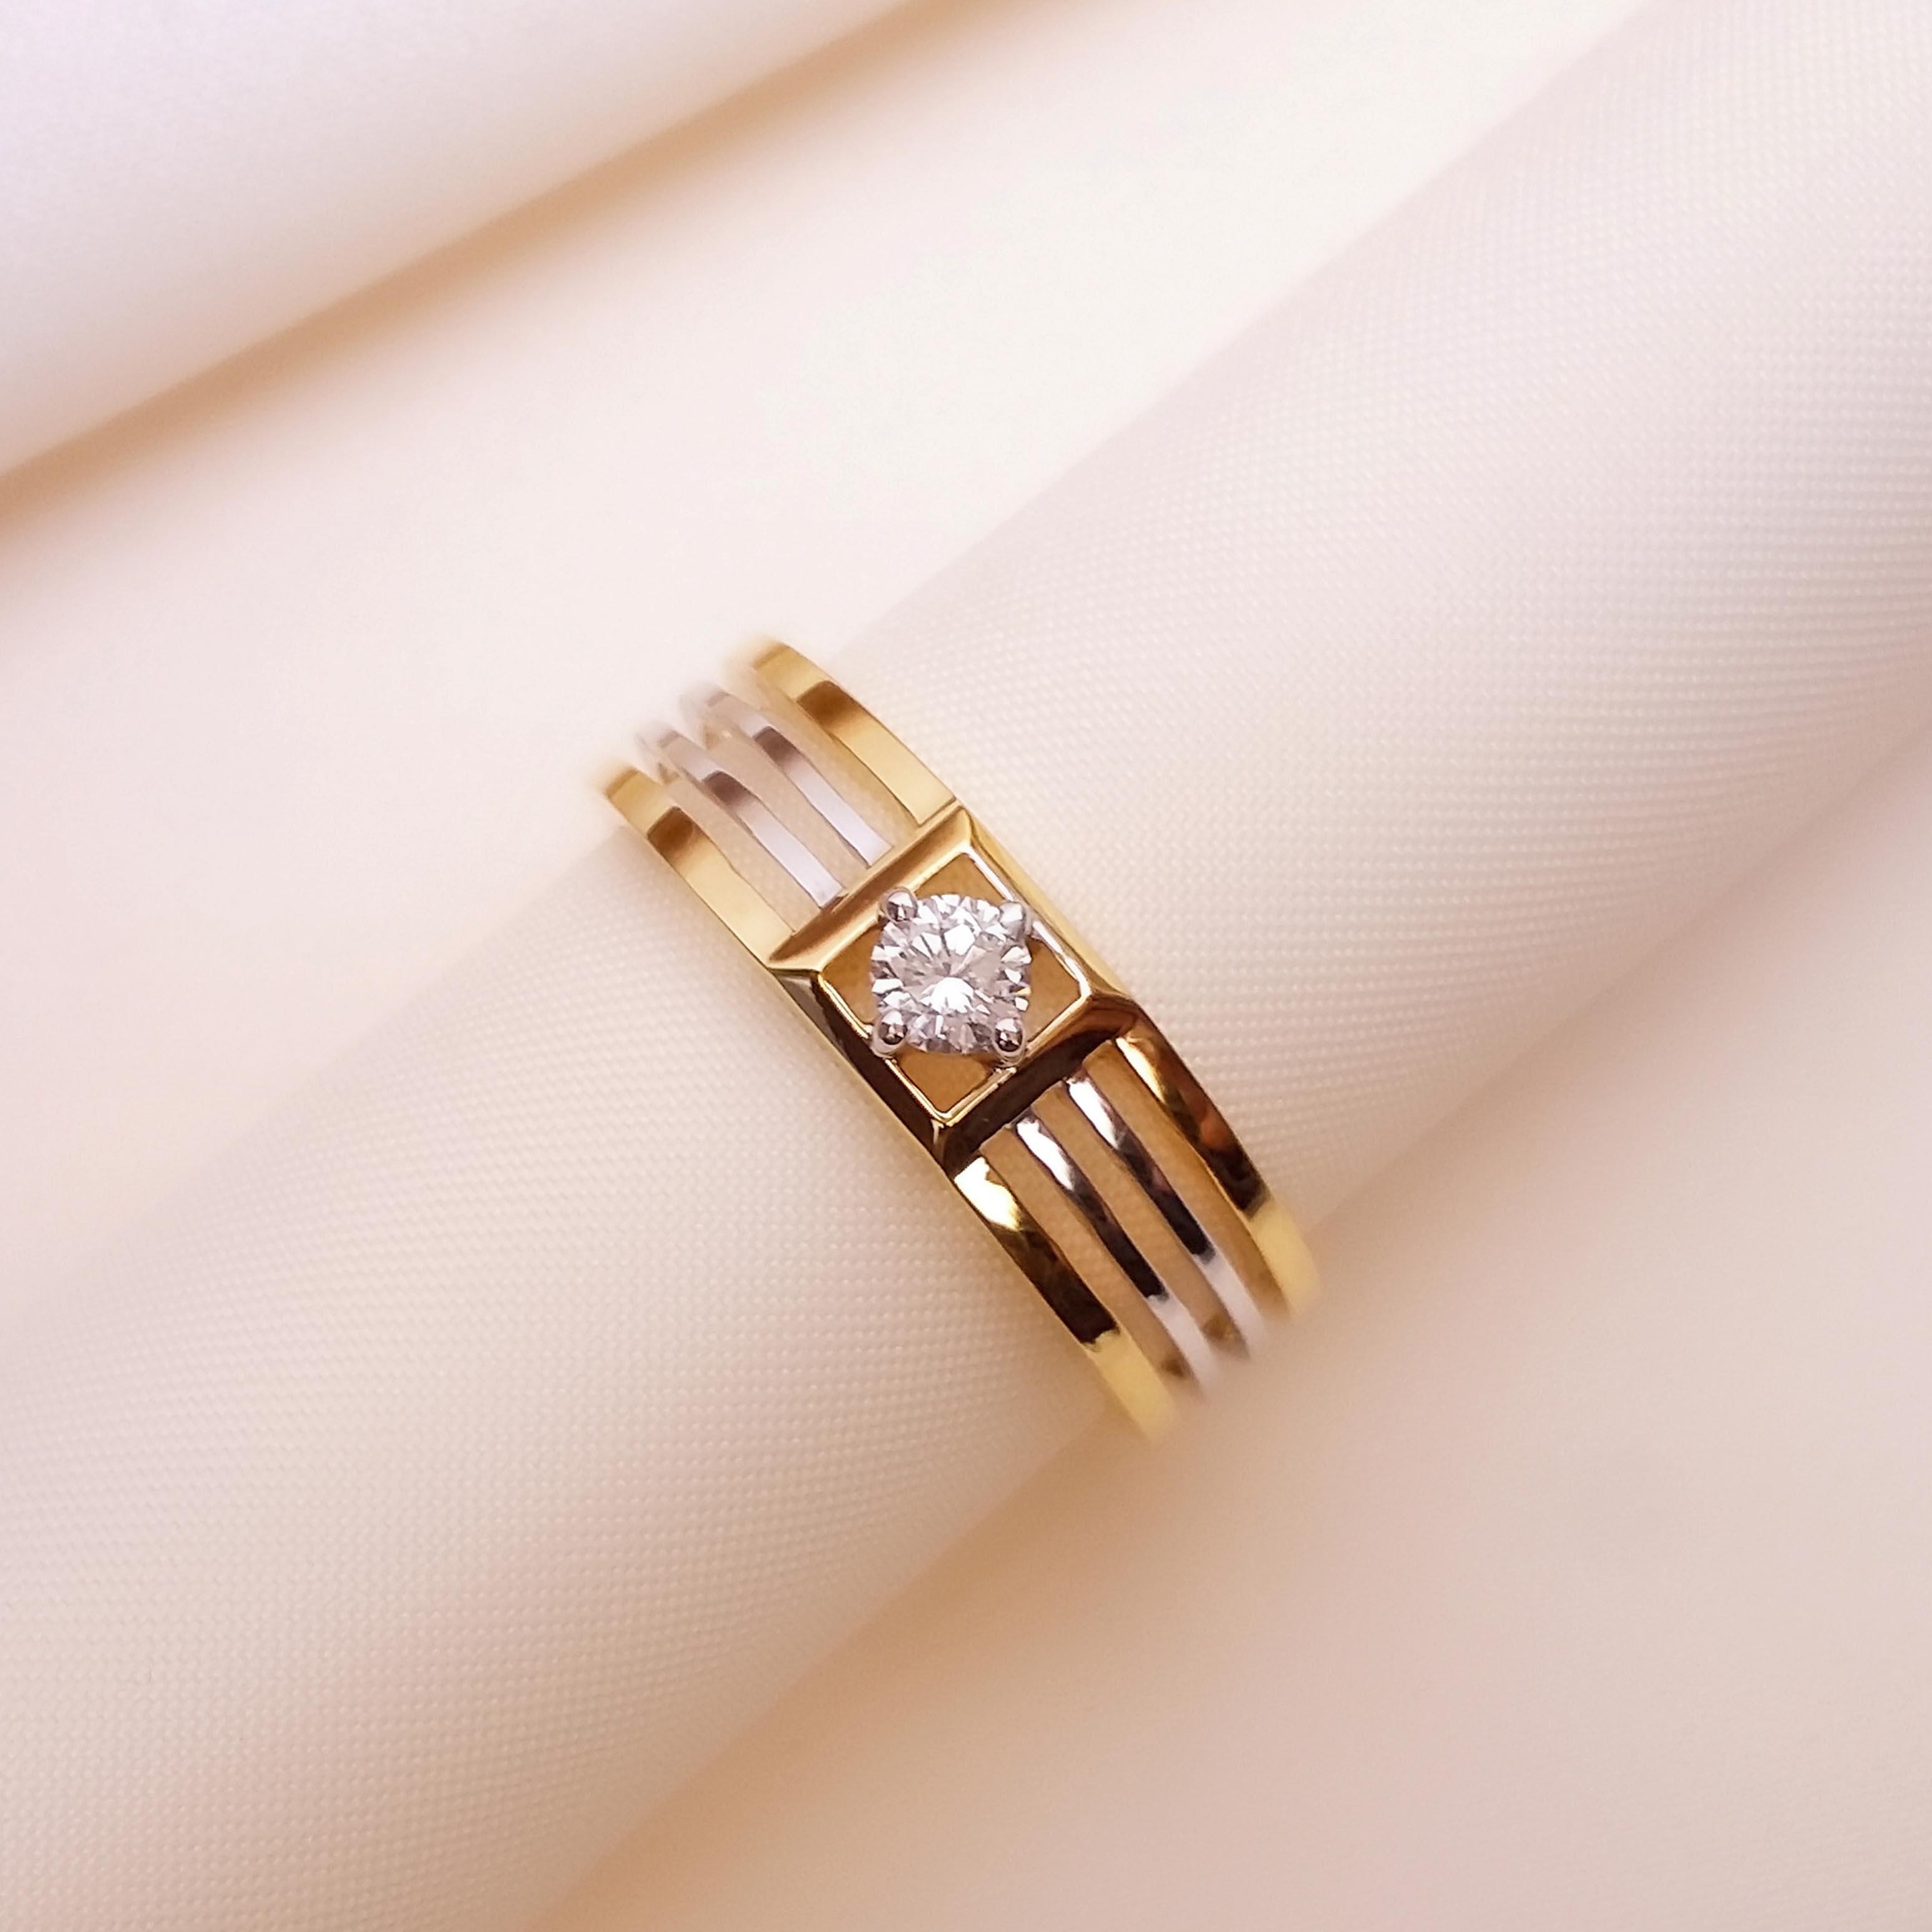 Discover 171+ gents diamond ring super hot